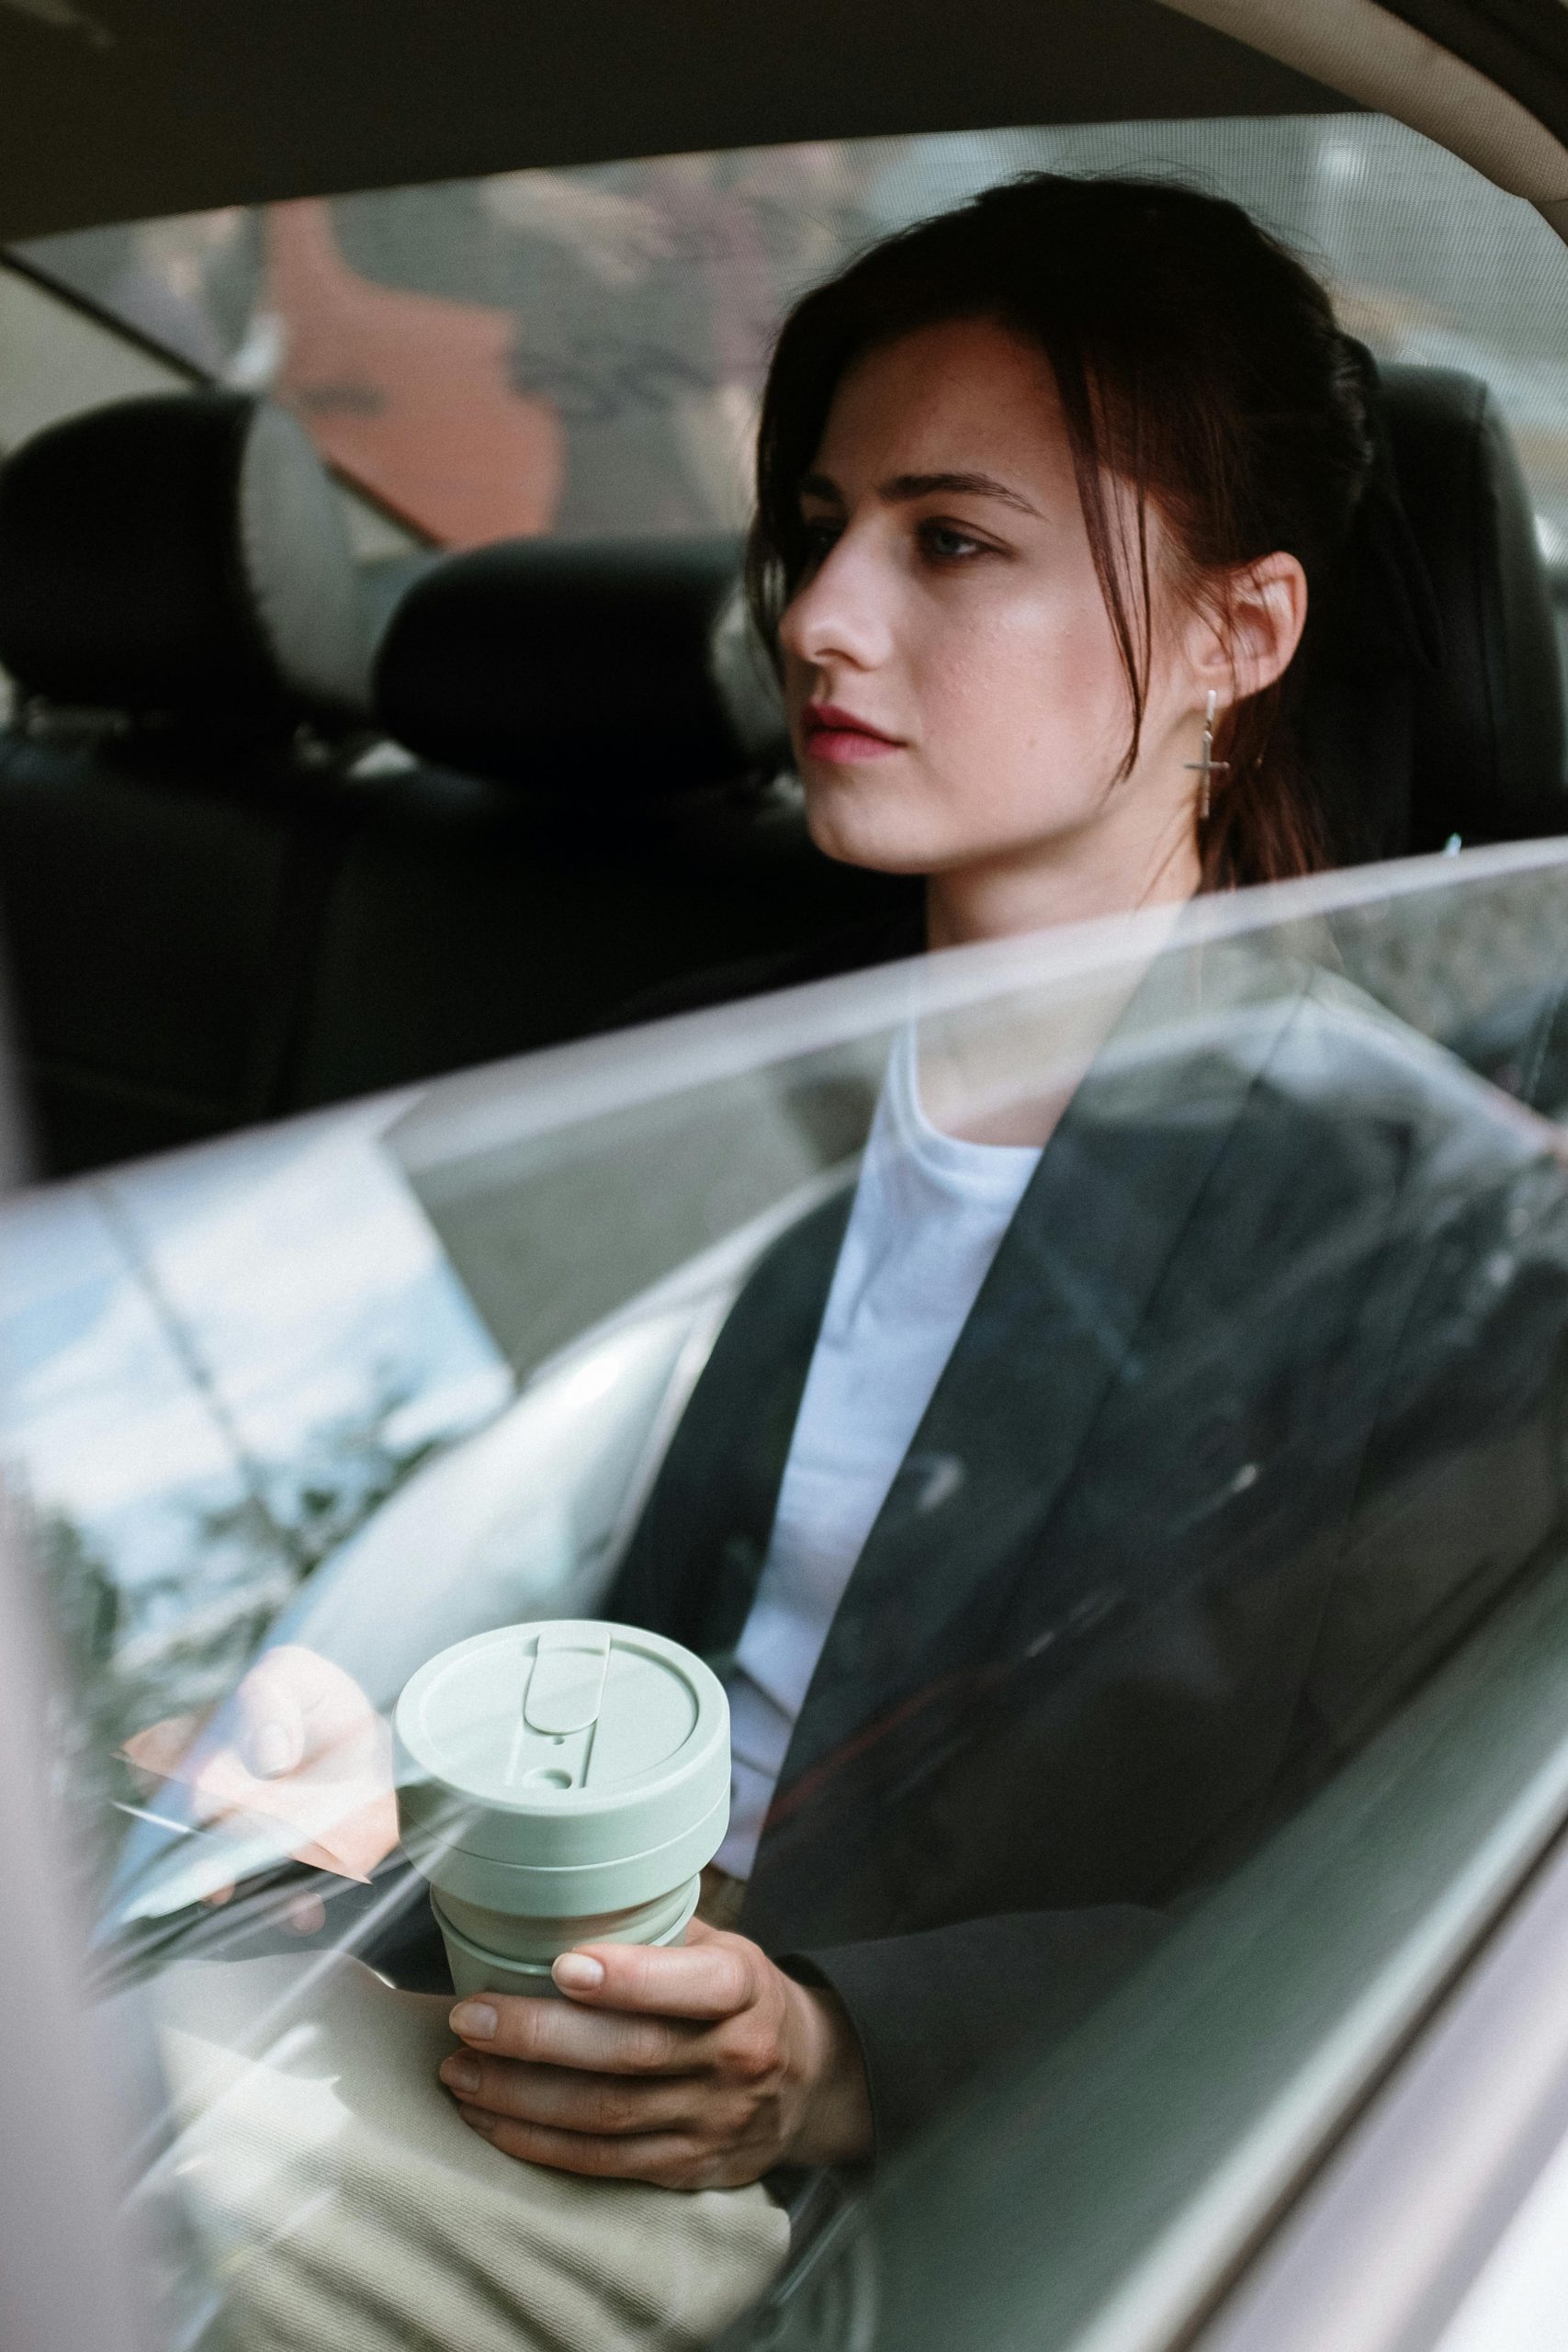 Woman sitting comfortably in luxury car service